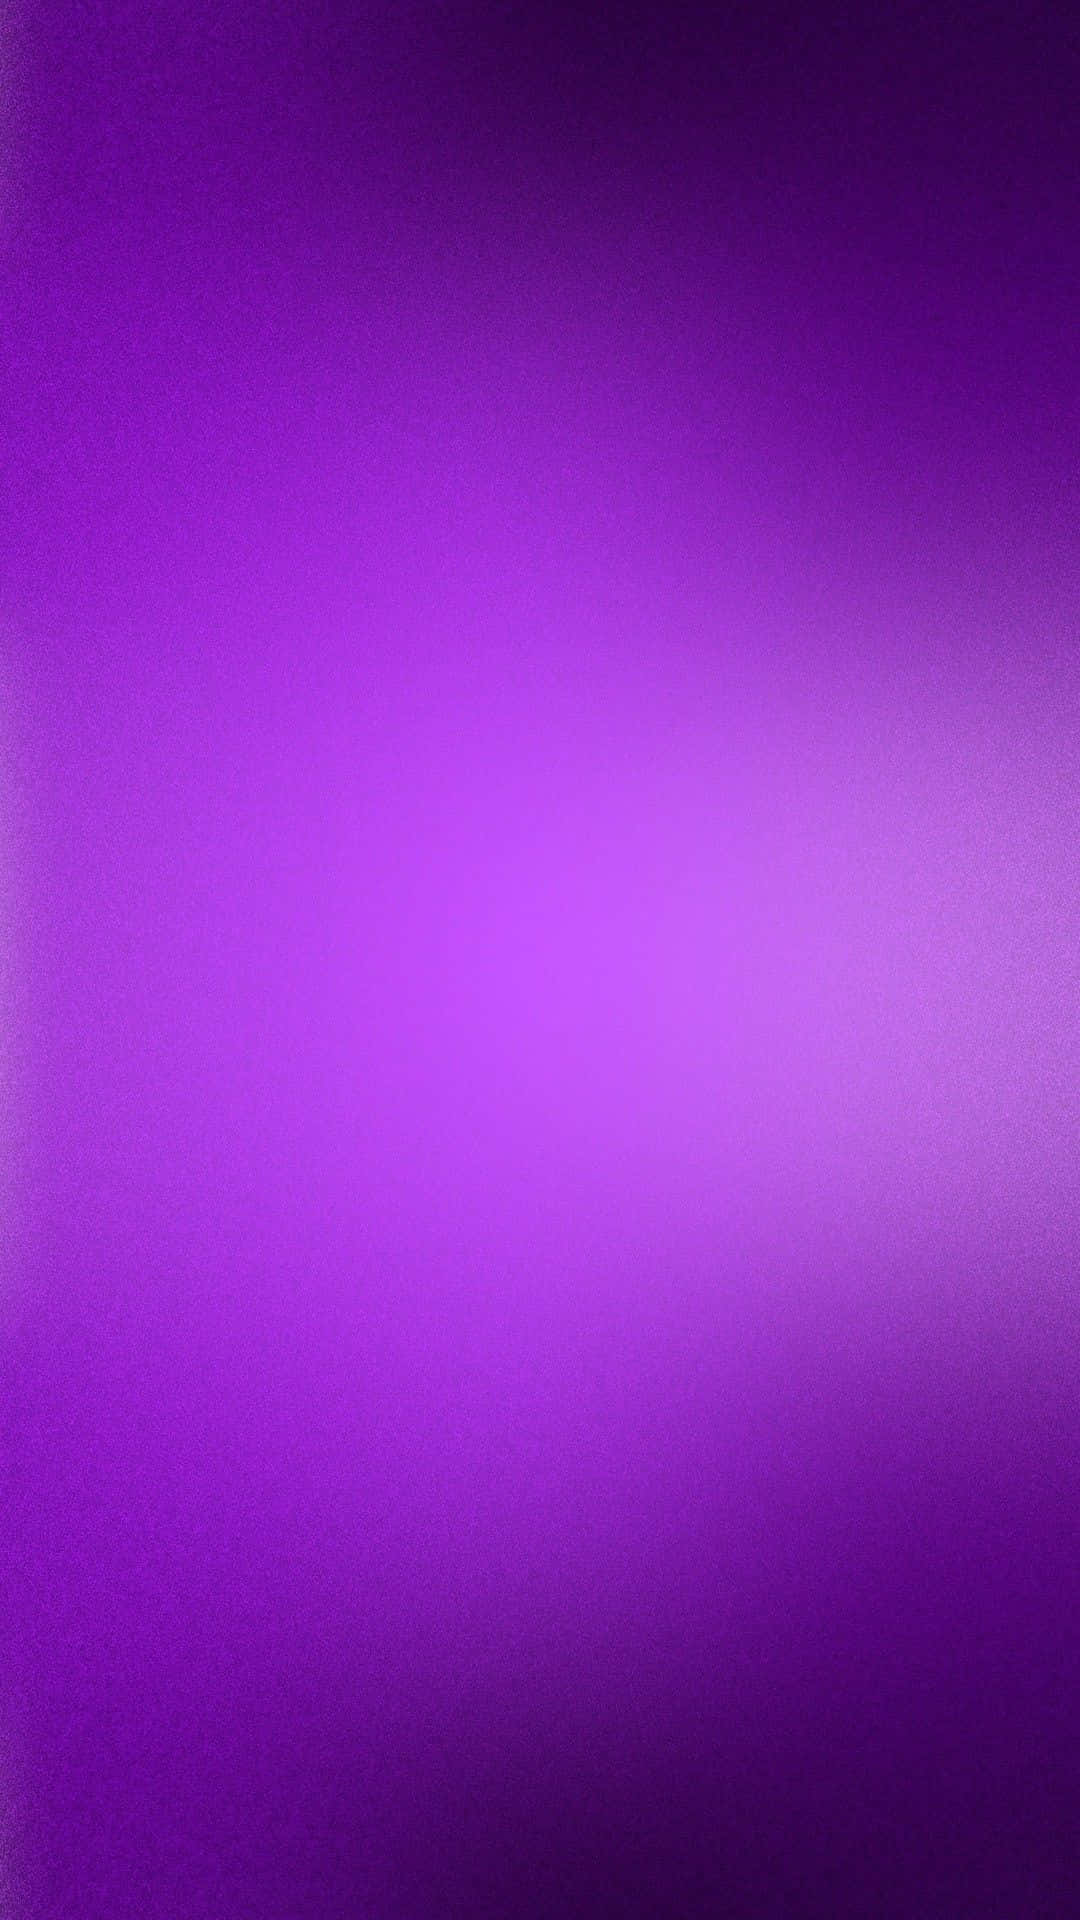 Solid Black And Purple Wallpaper